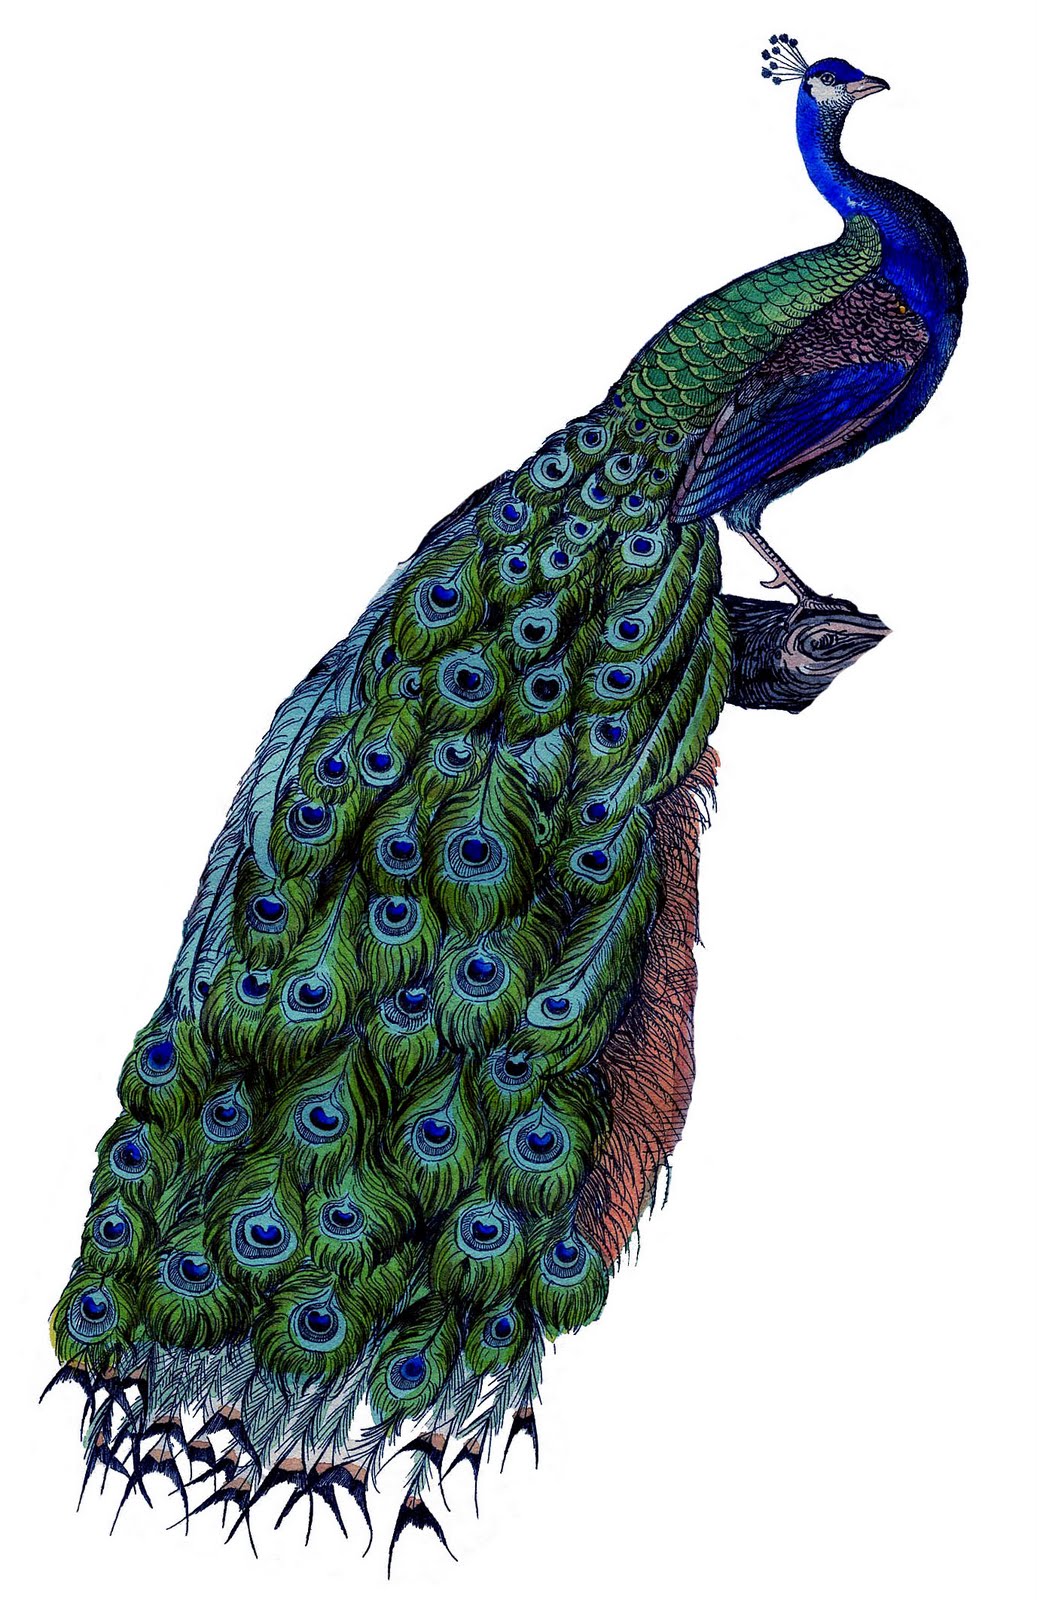 Peacock Images Collection (46+)